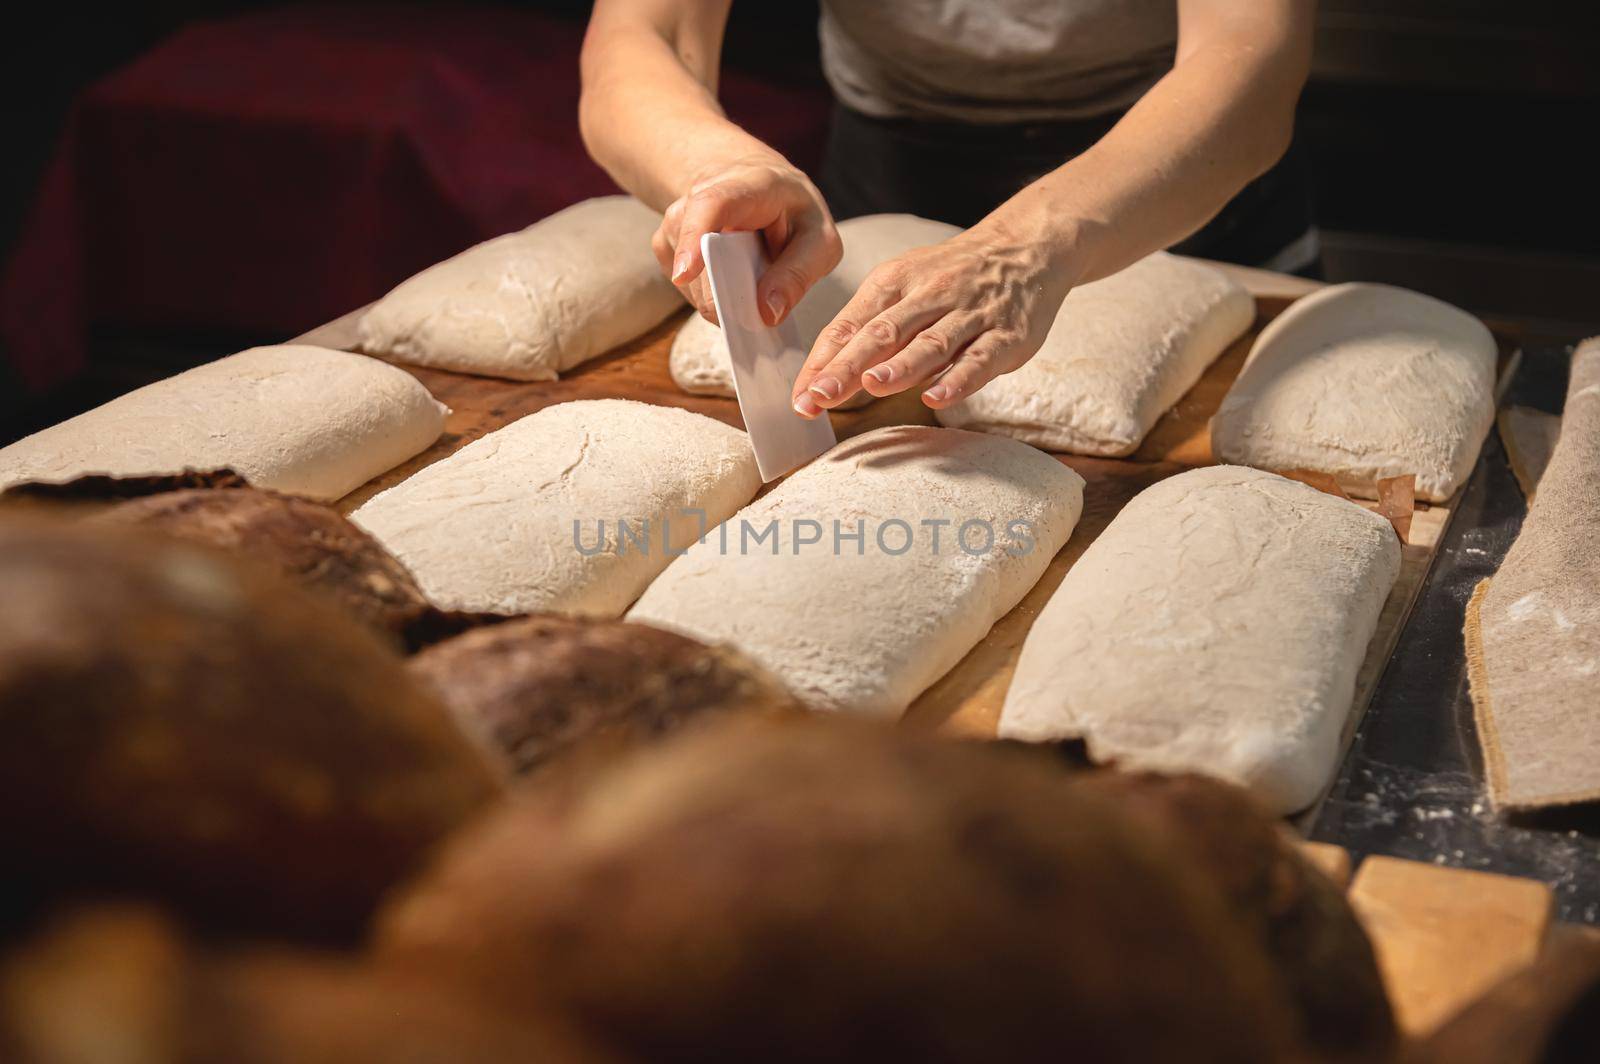 Women's hands carry out actions with raw bread. Dough before dipping into a bakery oven.